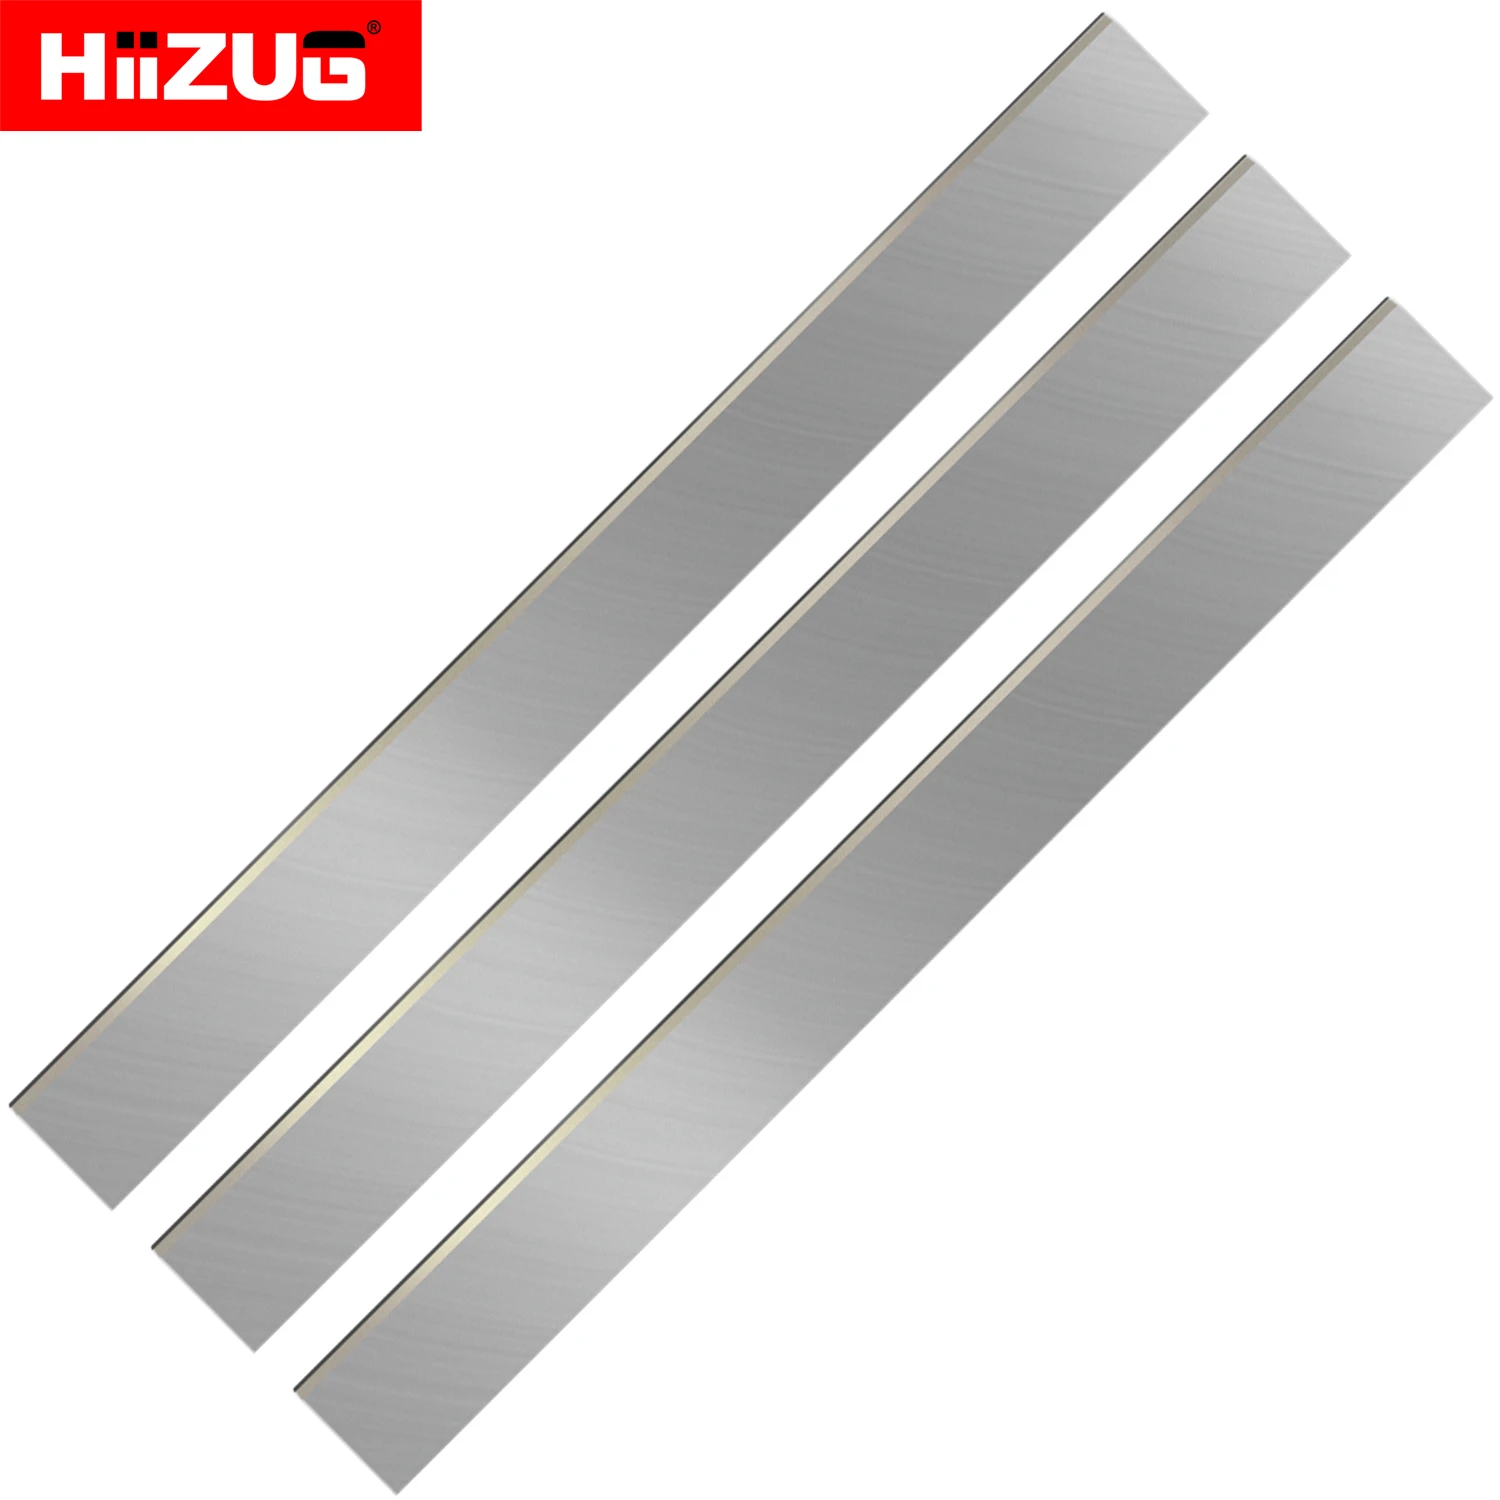 

360mm×35mm×3mm Planer Blades Knives for Electric Thicknesser Planer Jointer Cutter Heads Set of 3PCS